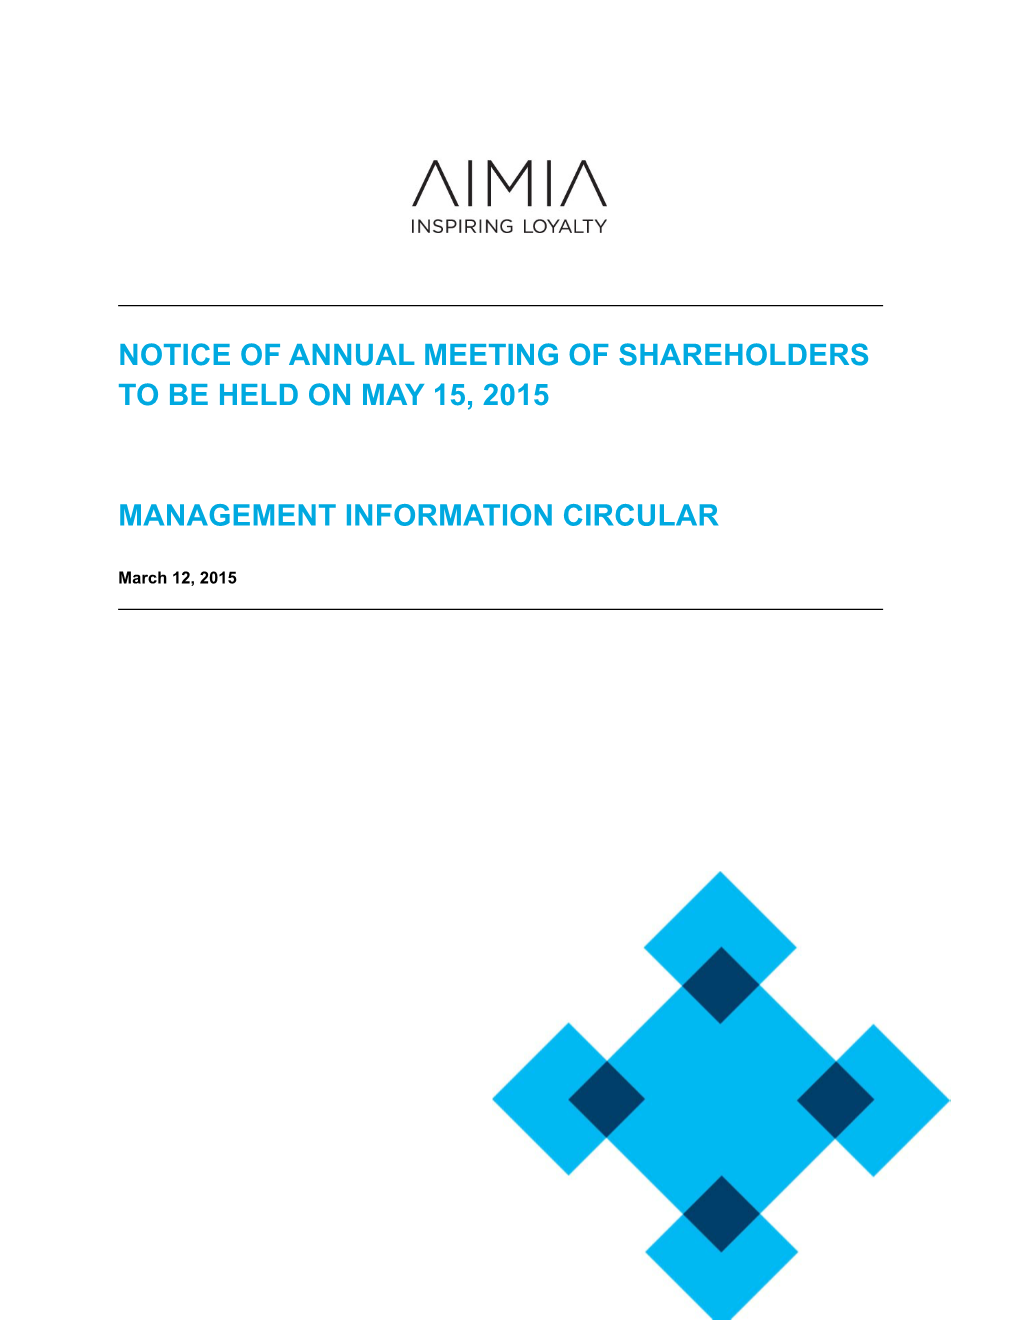 Notice of Annual Meeting of Shareholders to Be Held on May 15, 2015